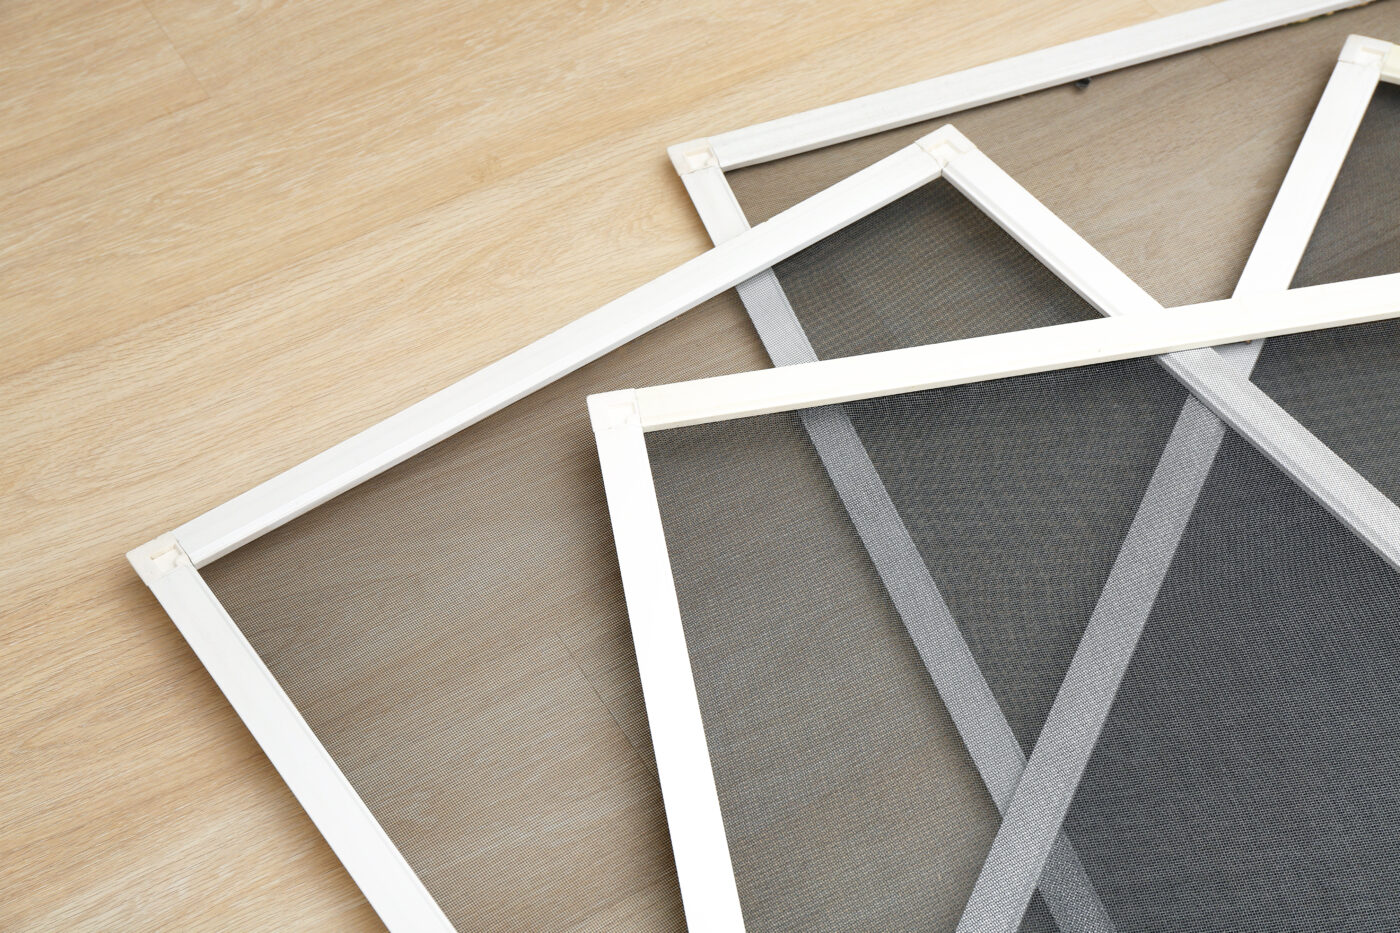 A group of energy-efficient metal frames on a wooden floor.